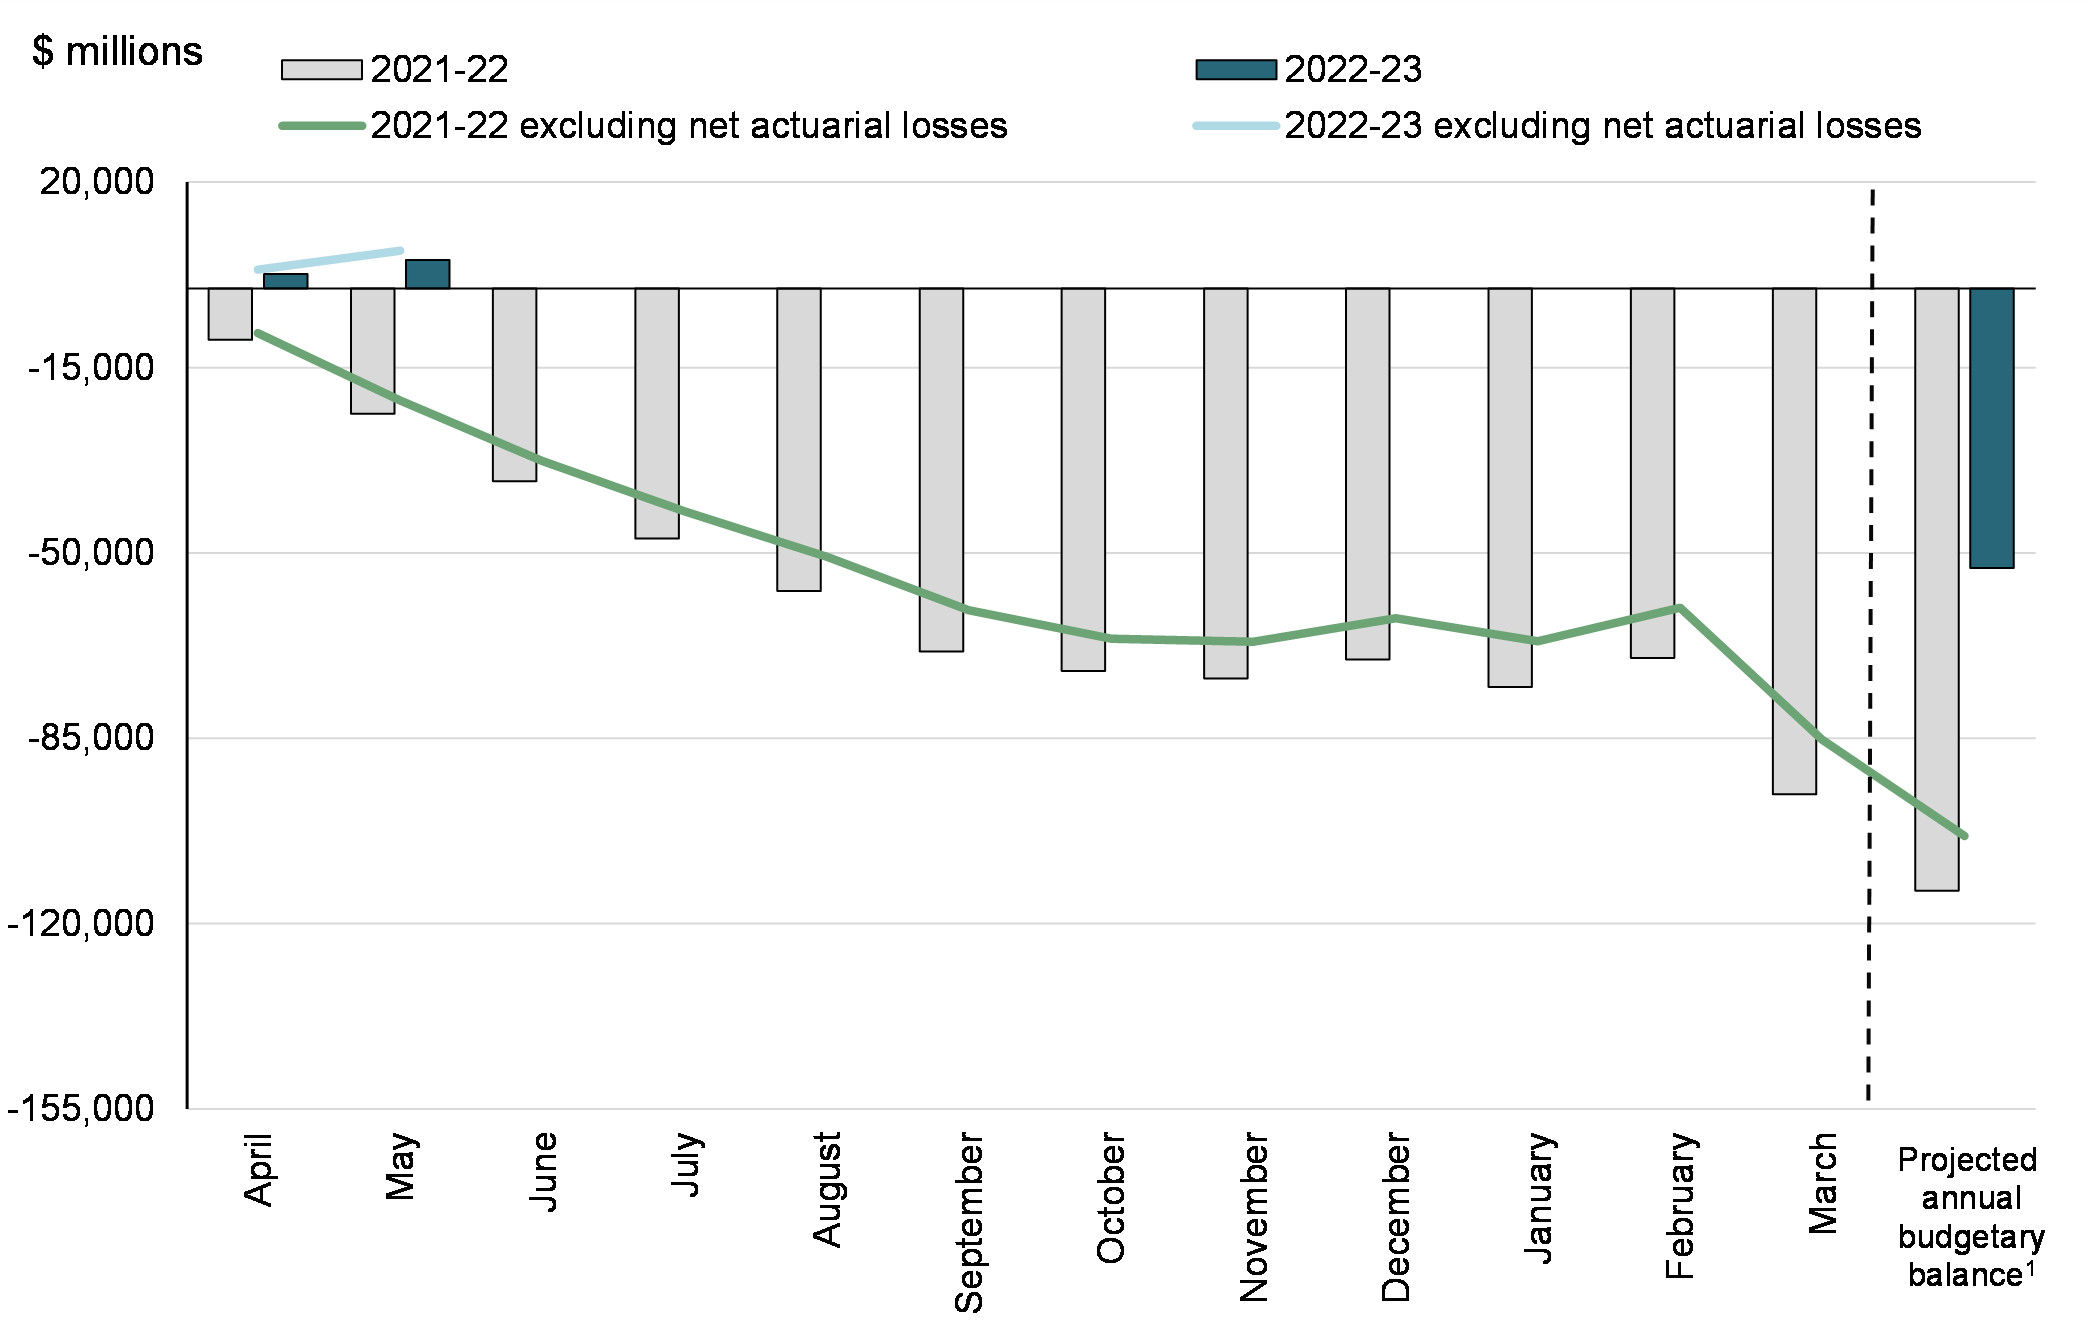 Chart 2: Year-to-Date Budgetary Balance and Budgetary Balance Excluding Net Actuarial Losses